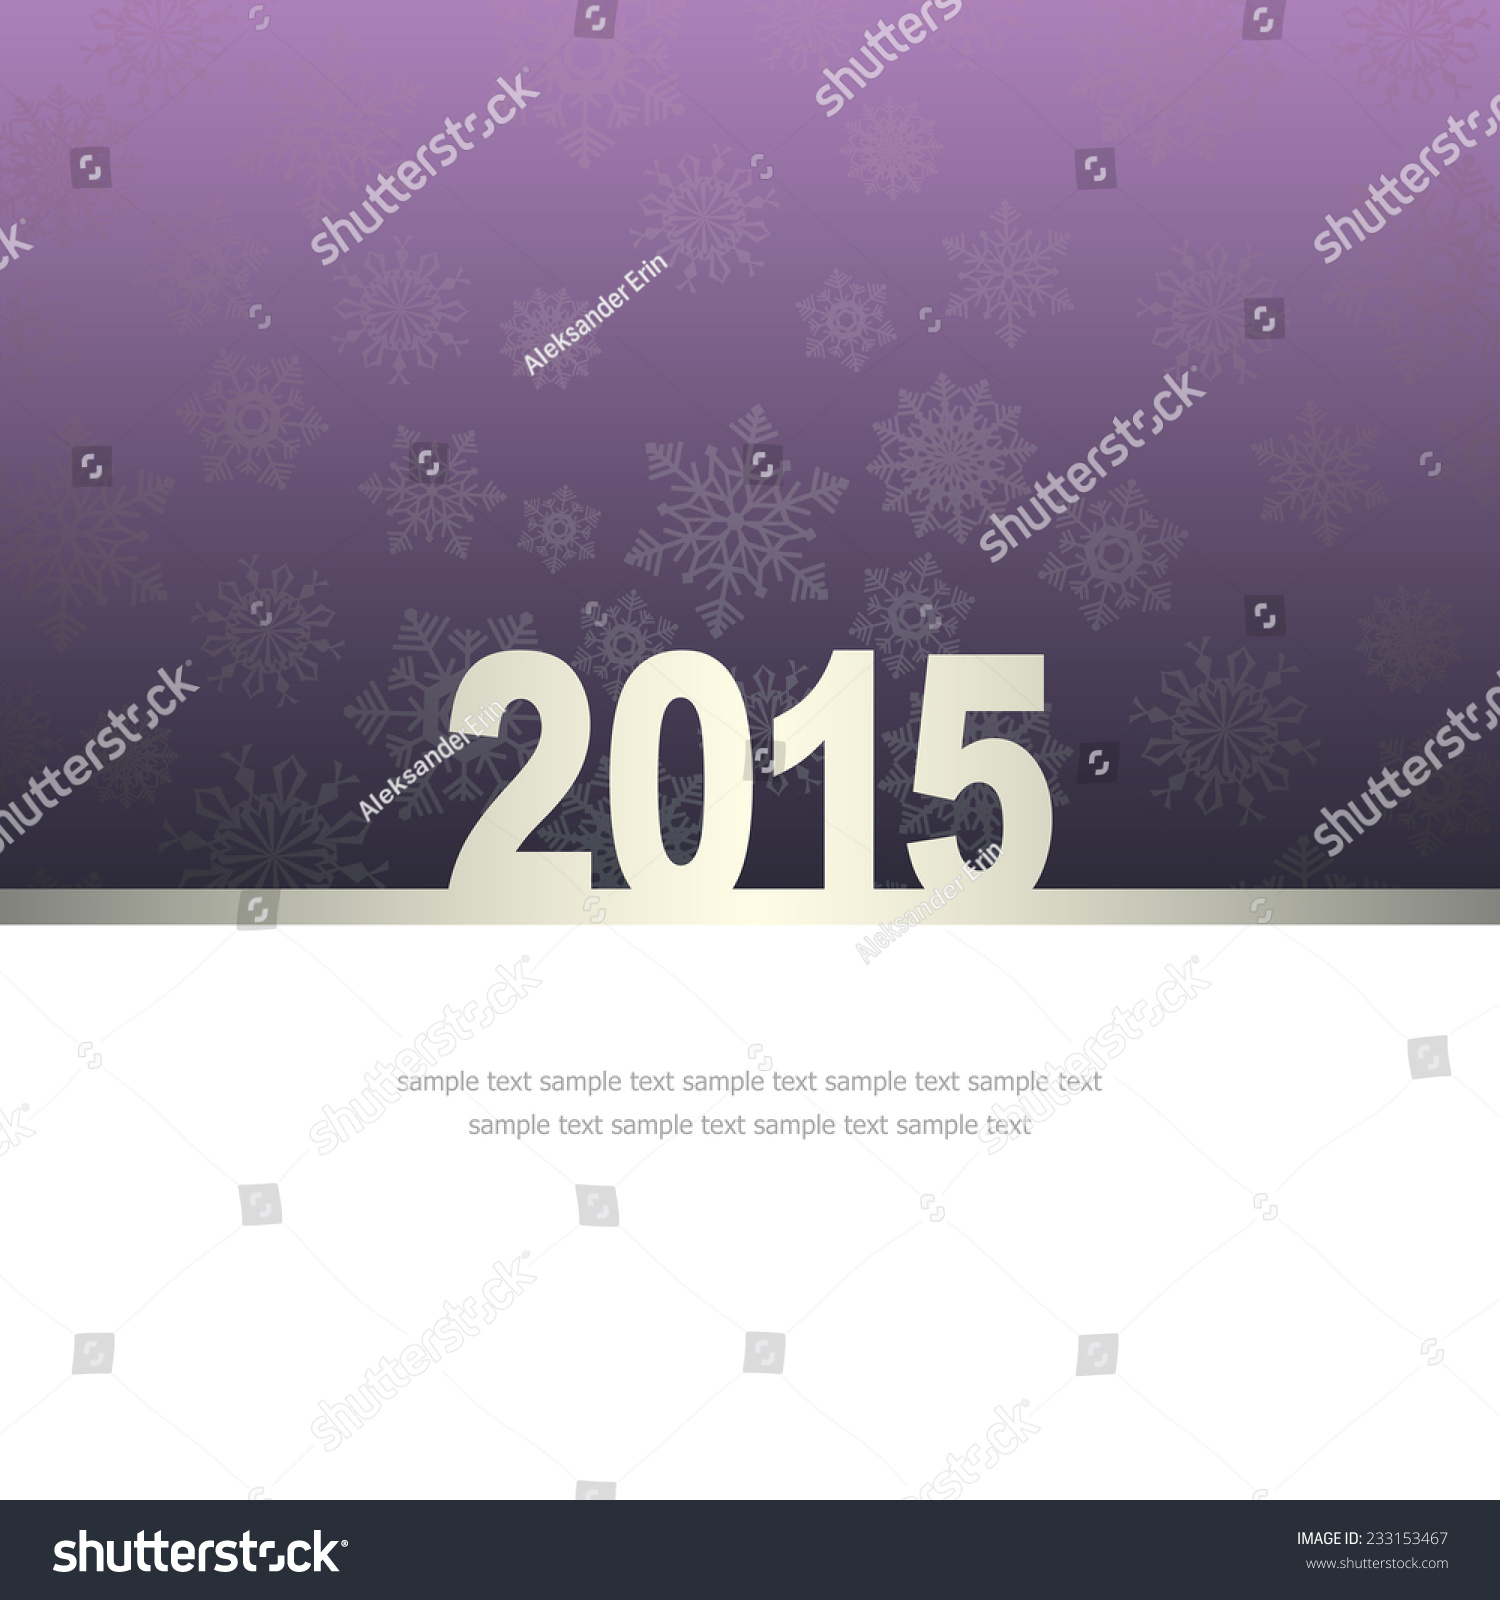 New Year Greeting Card with snowflakes and place for text #233153467